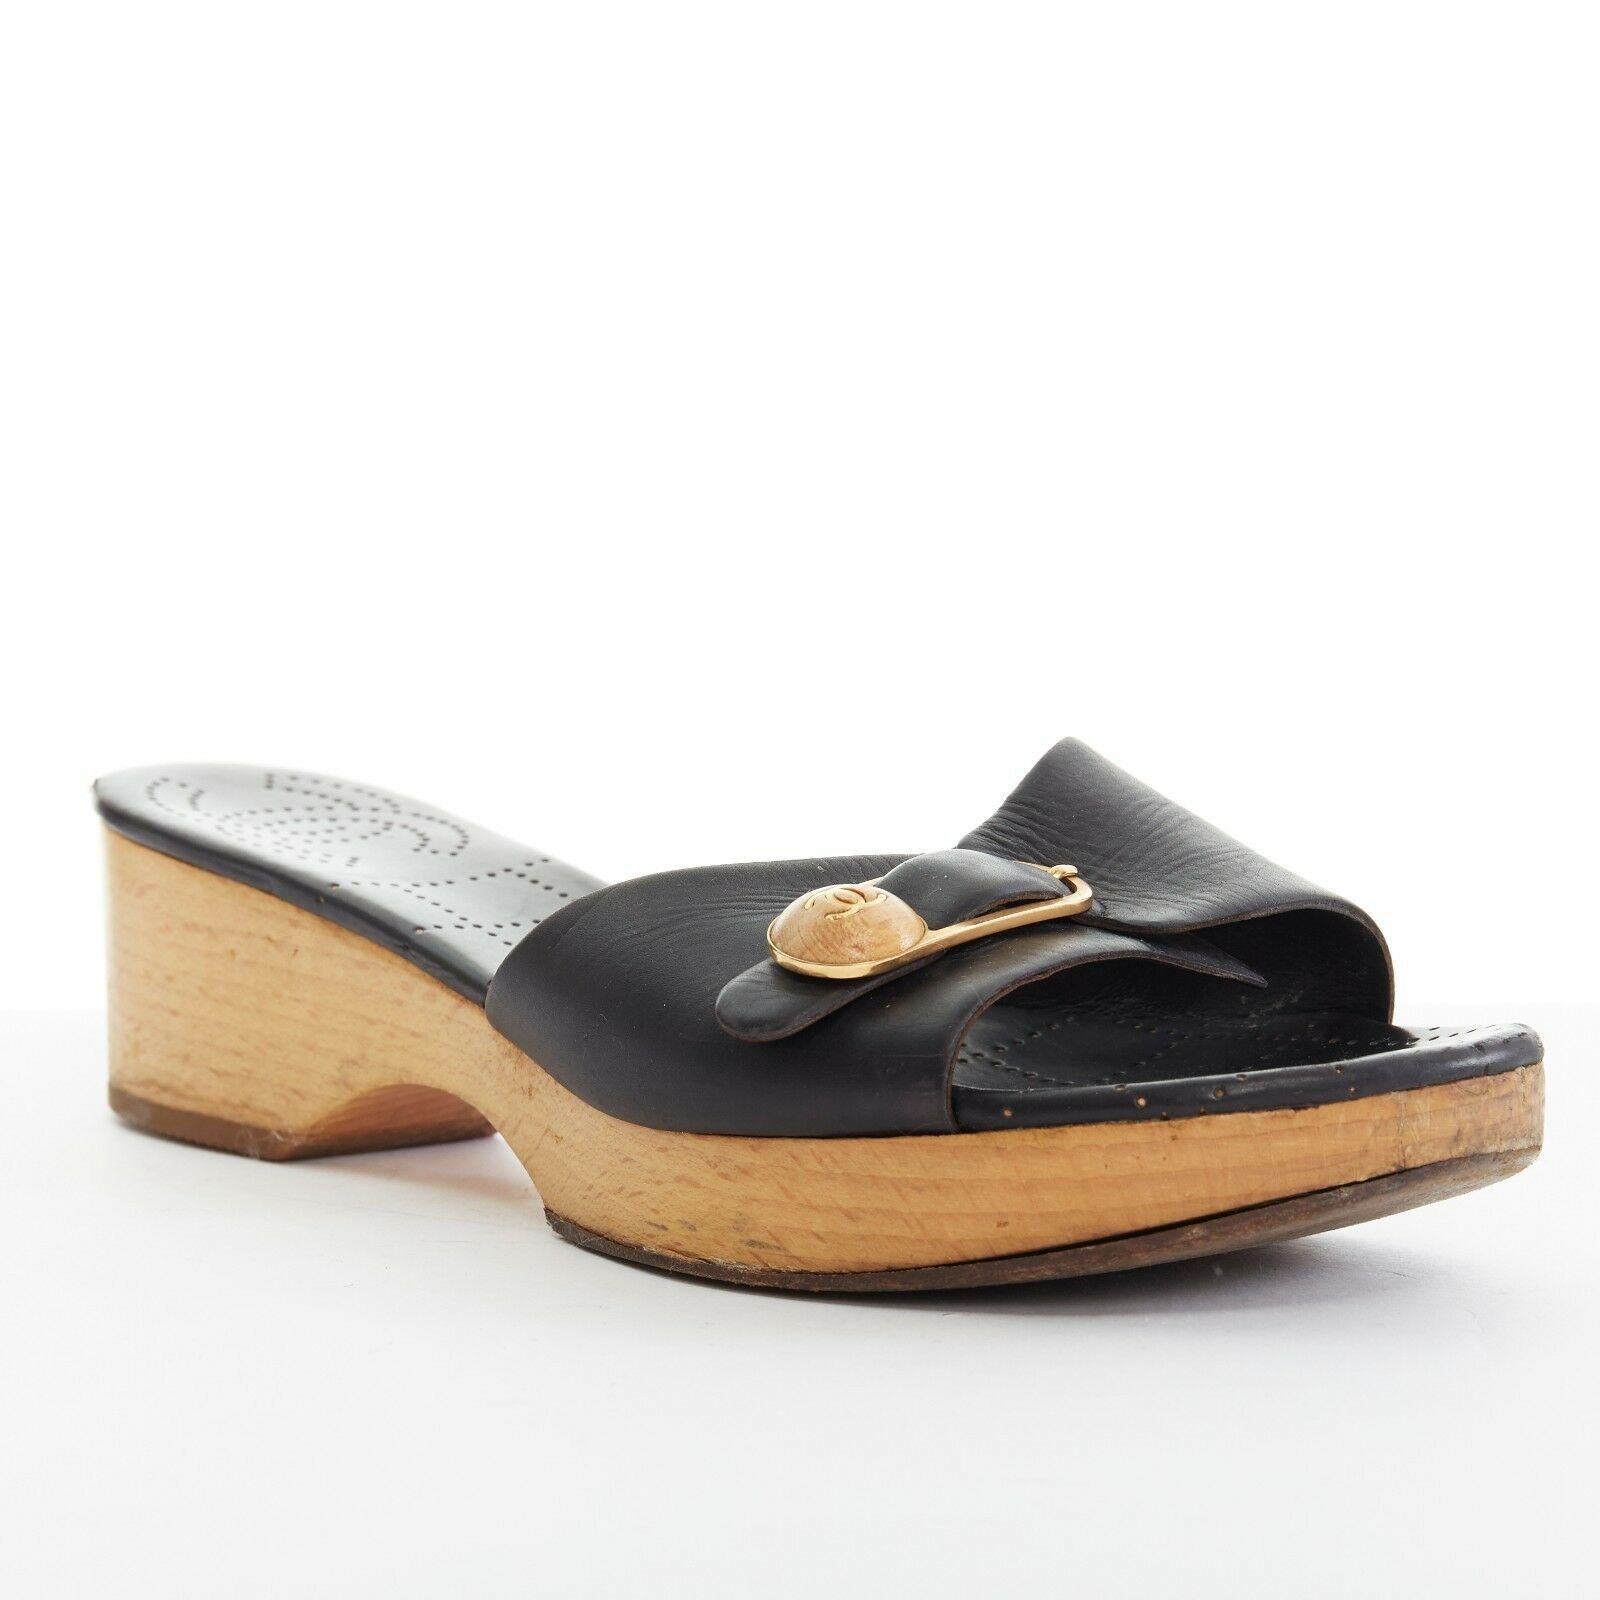 CHANEL gold wooden CC buckle black leather wooden platform clog sandals 8B EU38

CHANEL
Black leather upper. Gold-tone metalwith wooden CC buckle detail. Open toe. Wooden platform heel. Black leather lining with perforated quilting and CC logo. Clog